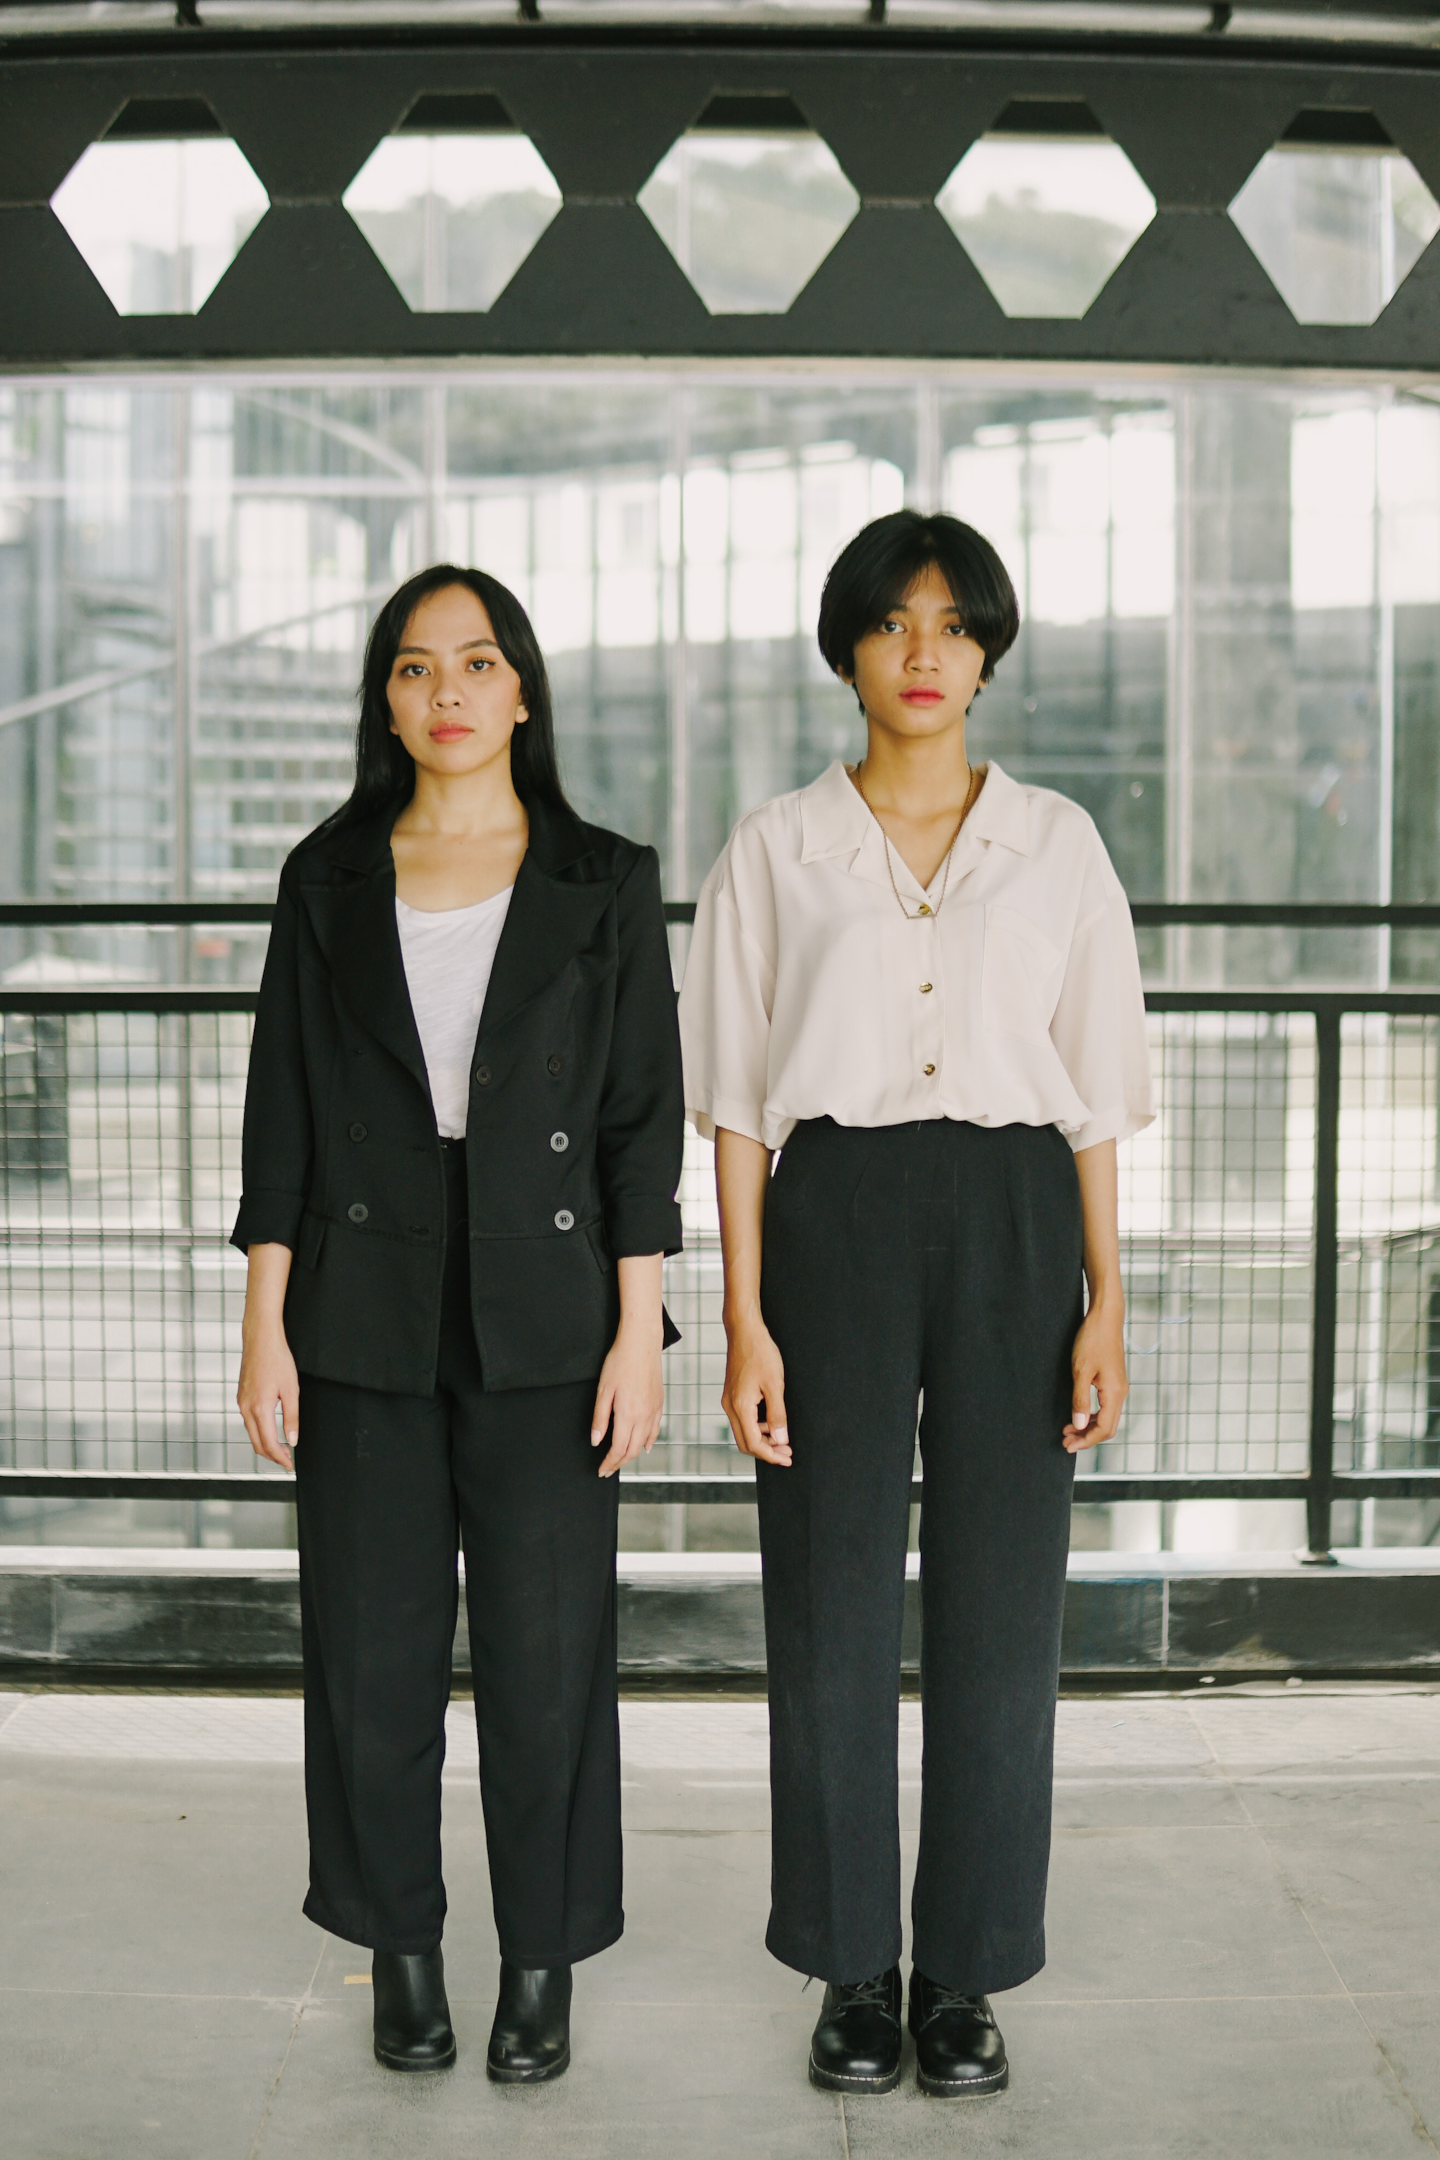 Two Young Women Wearing Basic Office Outfits Standing Side by Side